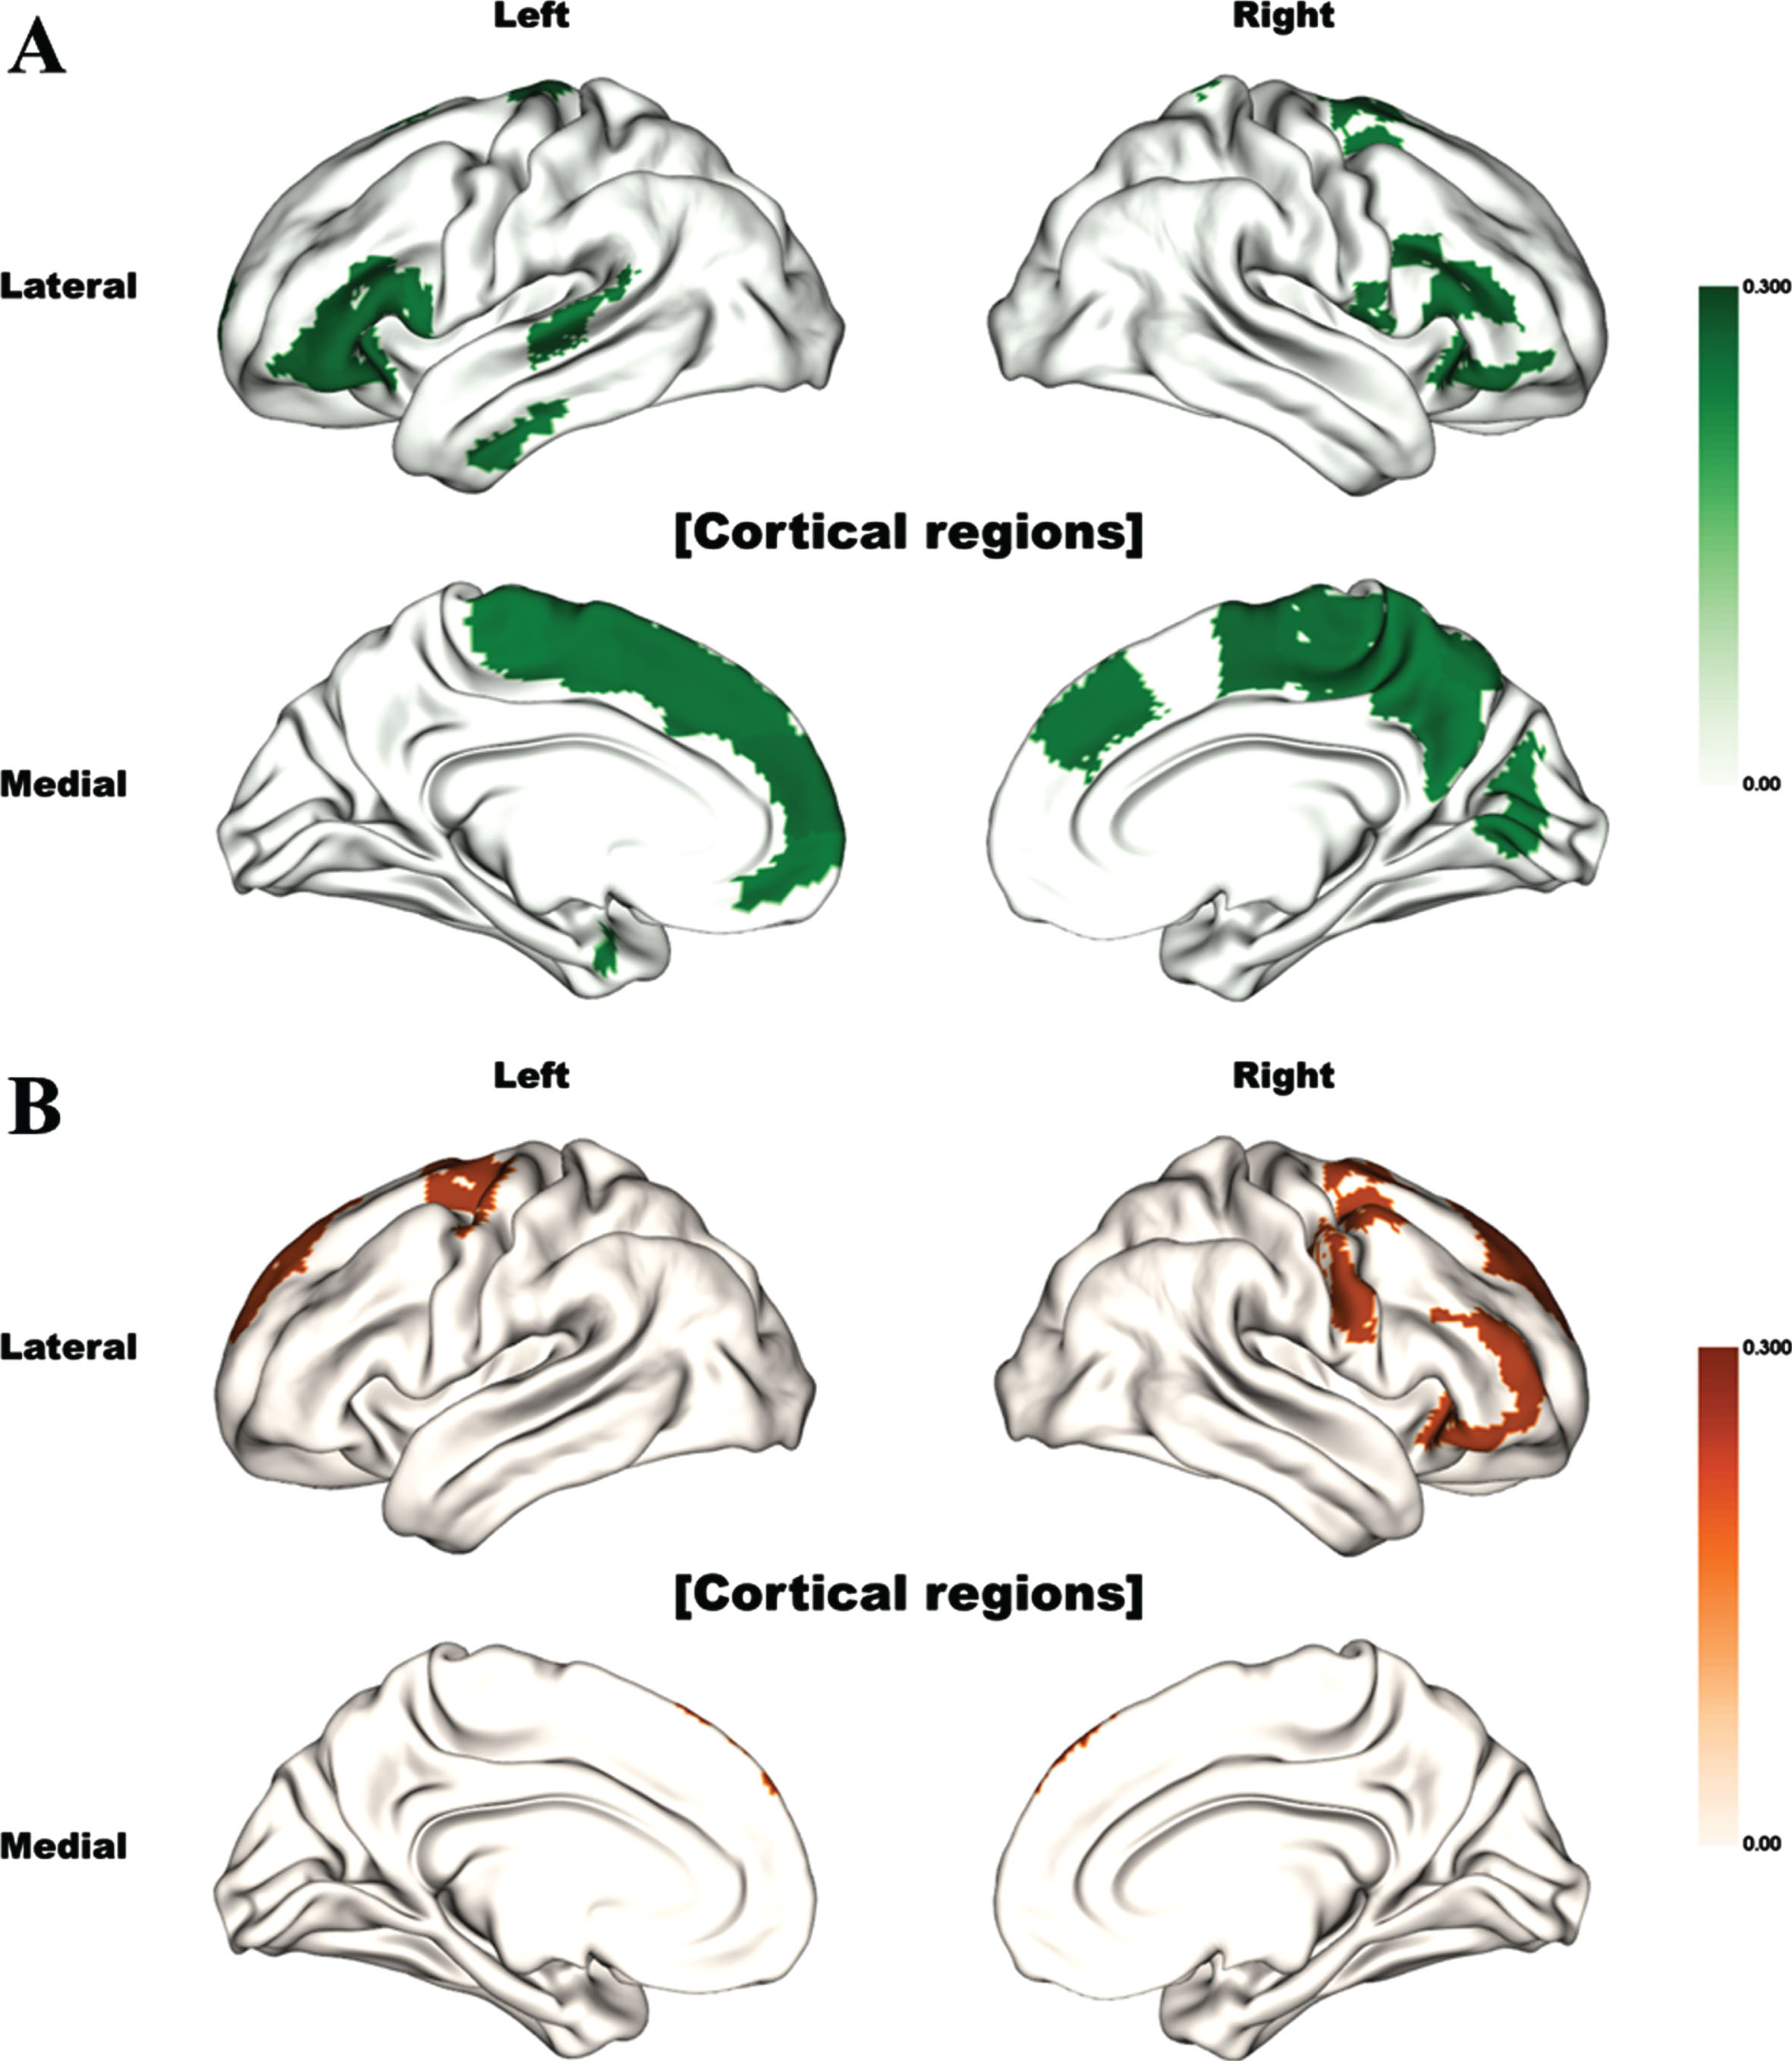 Brain regions significantly correlated with motor reserve estimate (Bonferroni corrected). The color indicates the correlation (rho) value. Significant correlations between motor reserve estimates and (A) fractional anisotropy values and (B) degree centrality values are shown.